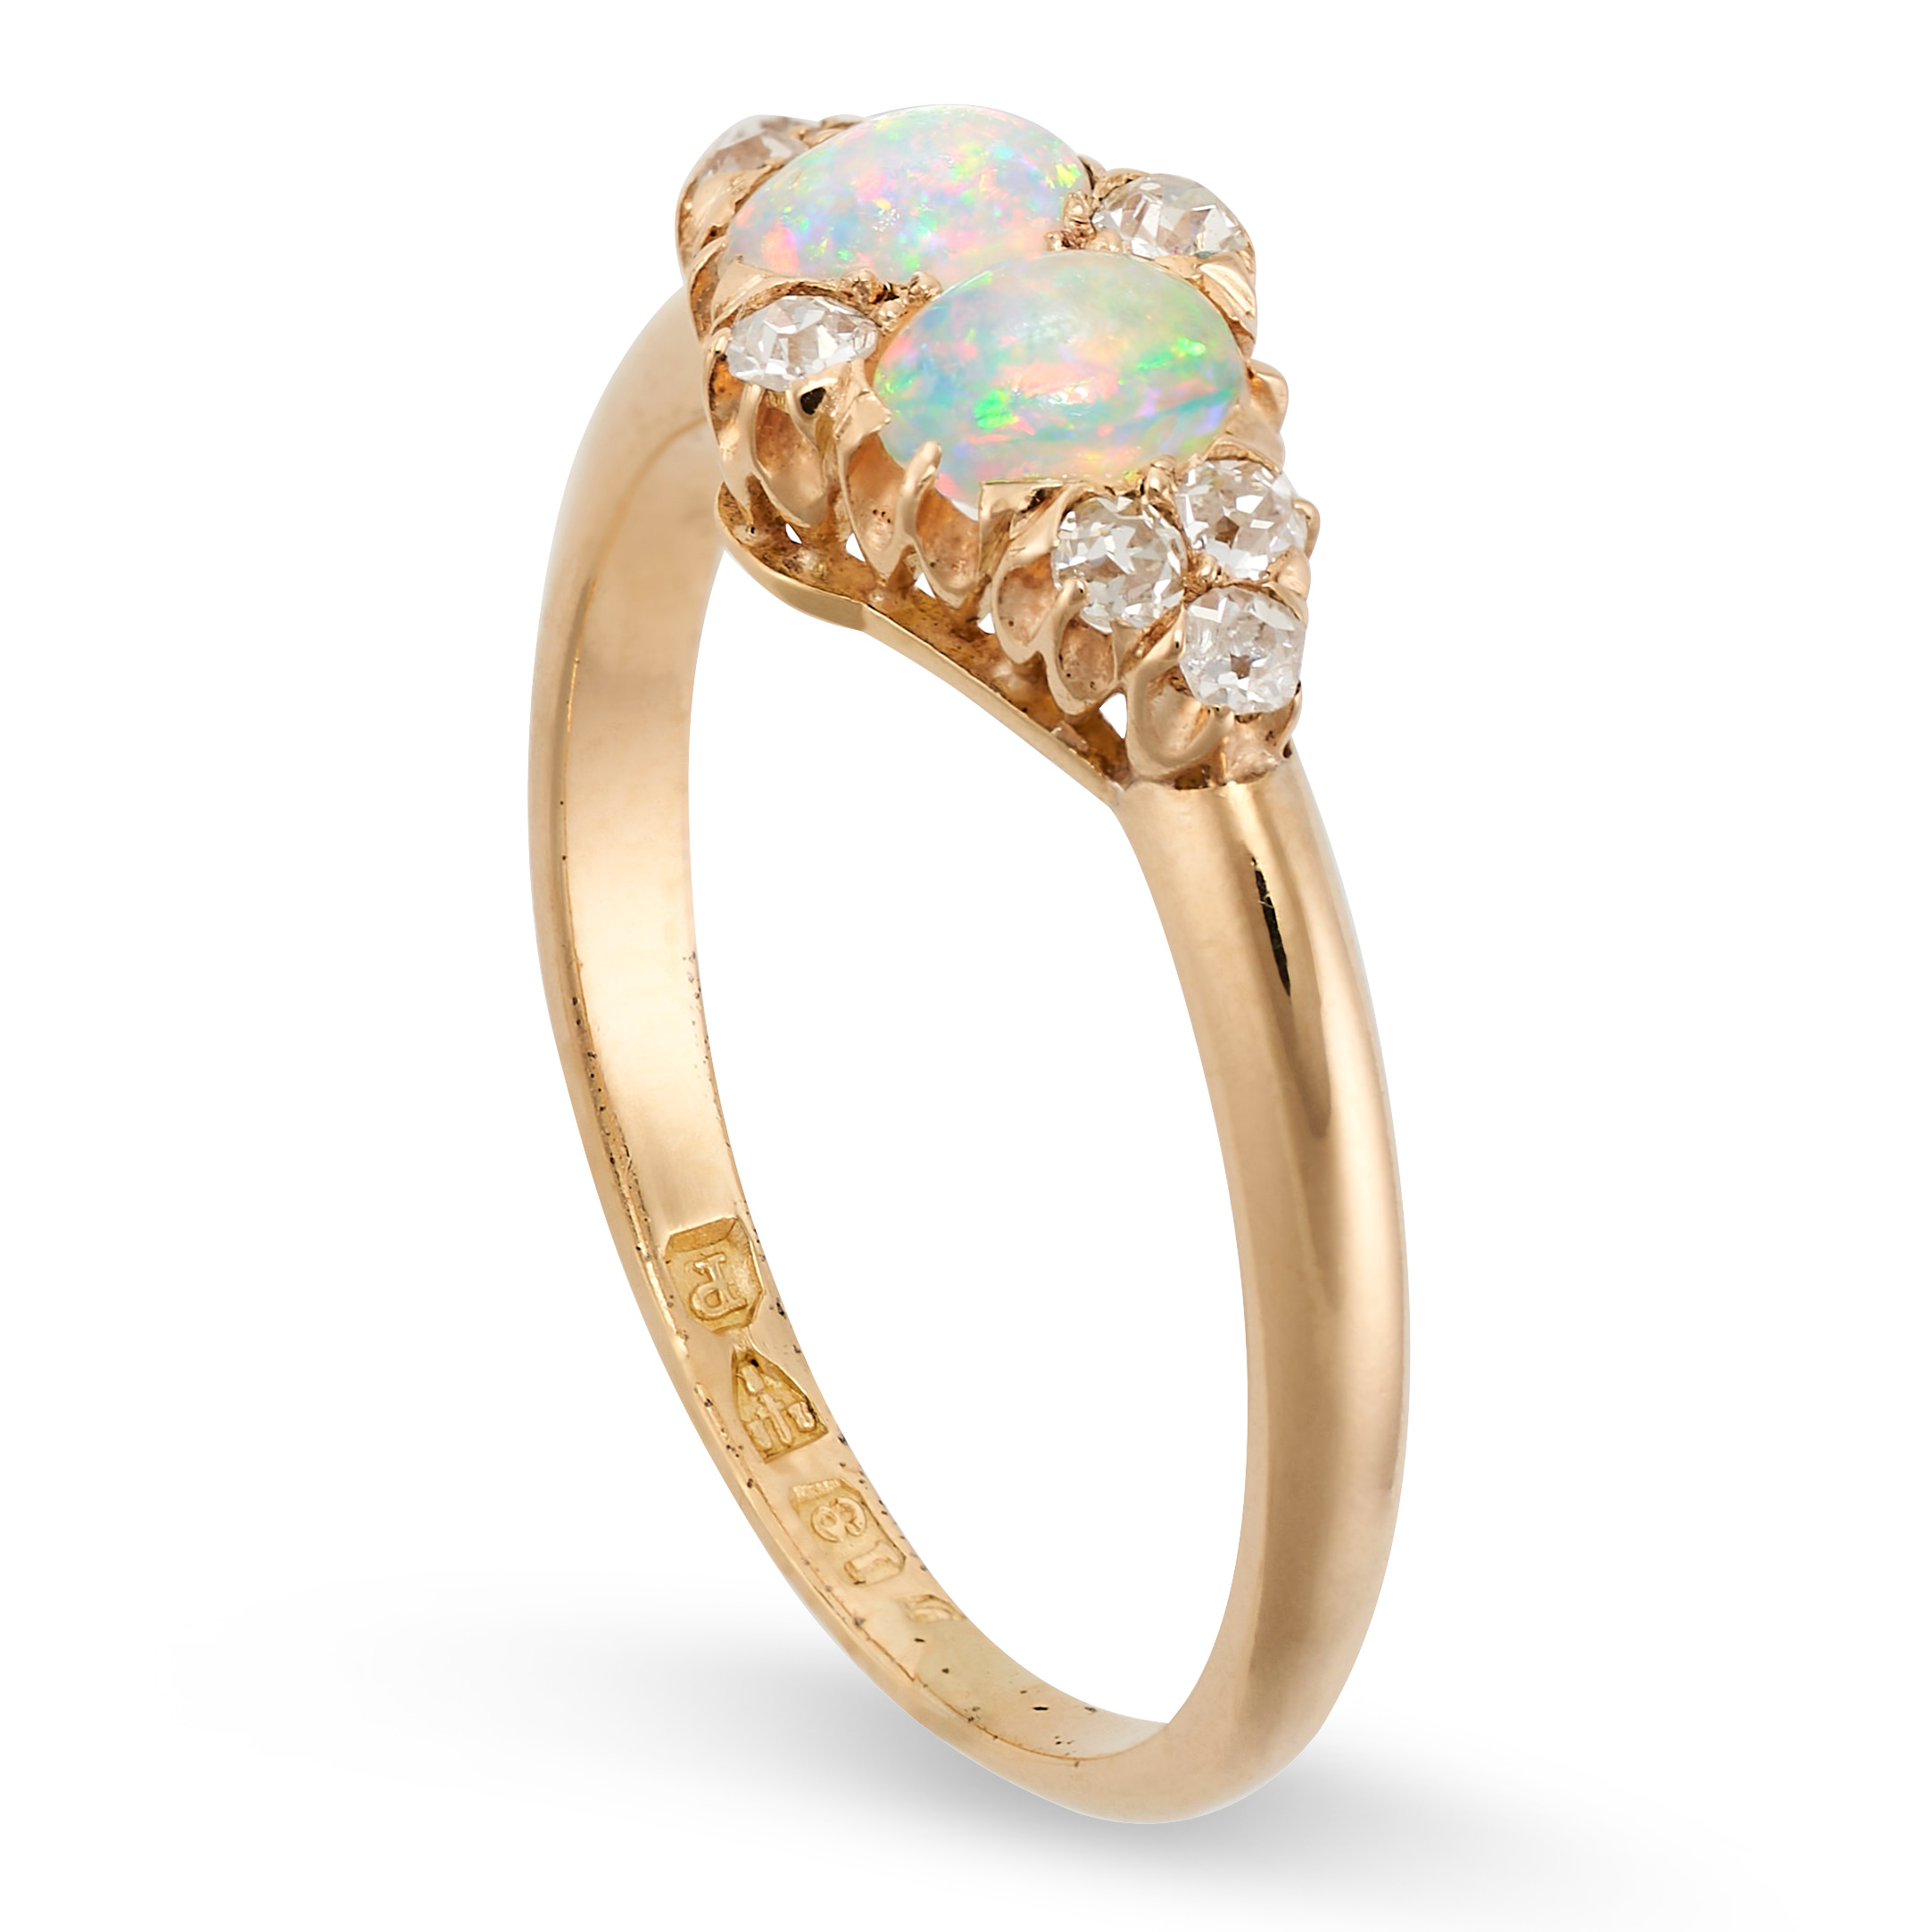 AN ANTIQUE OPAL AND DIAMOND RING, 19TH CENTURY in 18ct yellow gold, set with two cabochon opals - Image 2 of 2